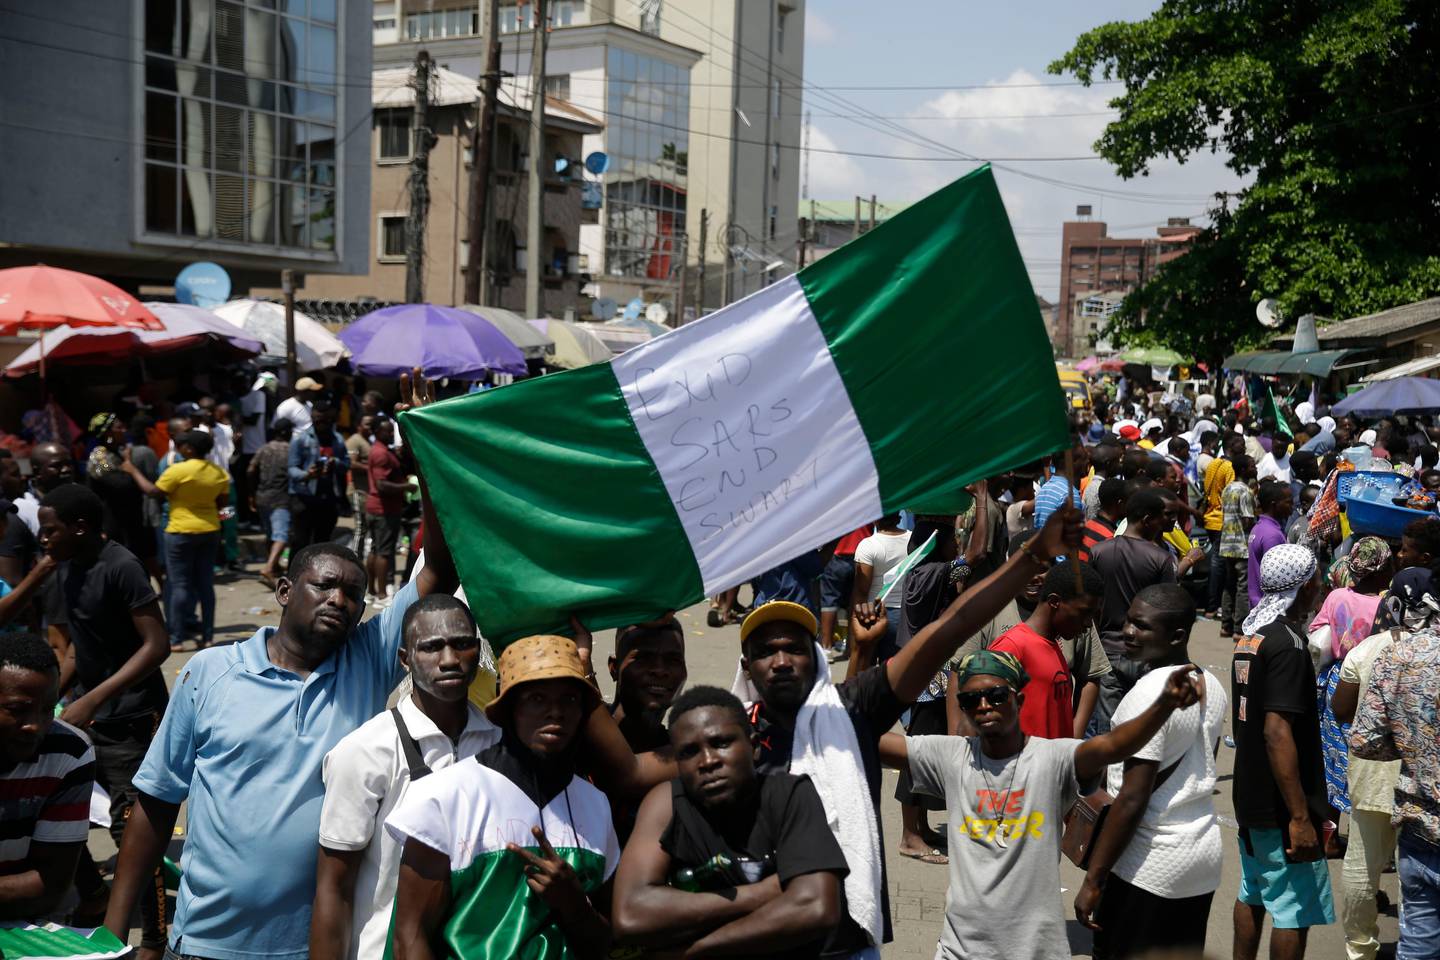 People hold banners as they demonstrate on the street to protest against police brutality, in Lagos, Nigeria, Tuesday Oct. 20, 2020. After 13 days of protests against police brutality, authorities have imposed a 24-hour curfew in Lagos Nigeria's largest city as moves are made to stop growing violence. (AP Photo/Sunday Alamba)